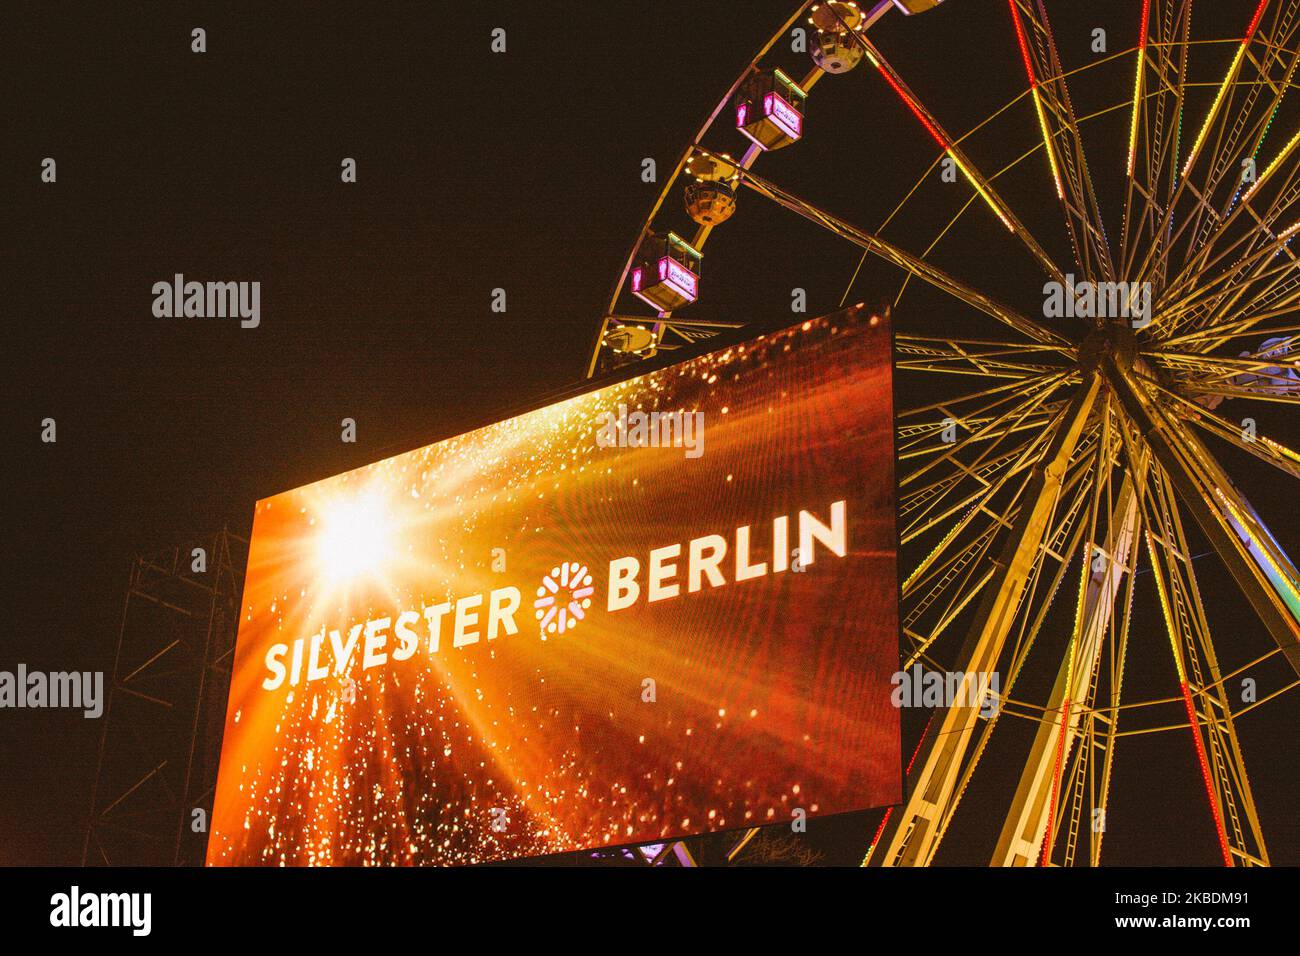 Brandenburg gate berlin new - years stock 2 - Alamy and hi-res images photography eve Page